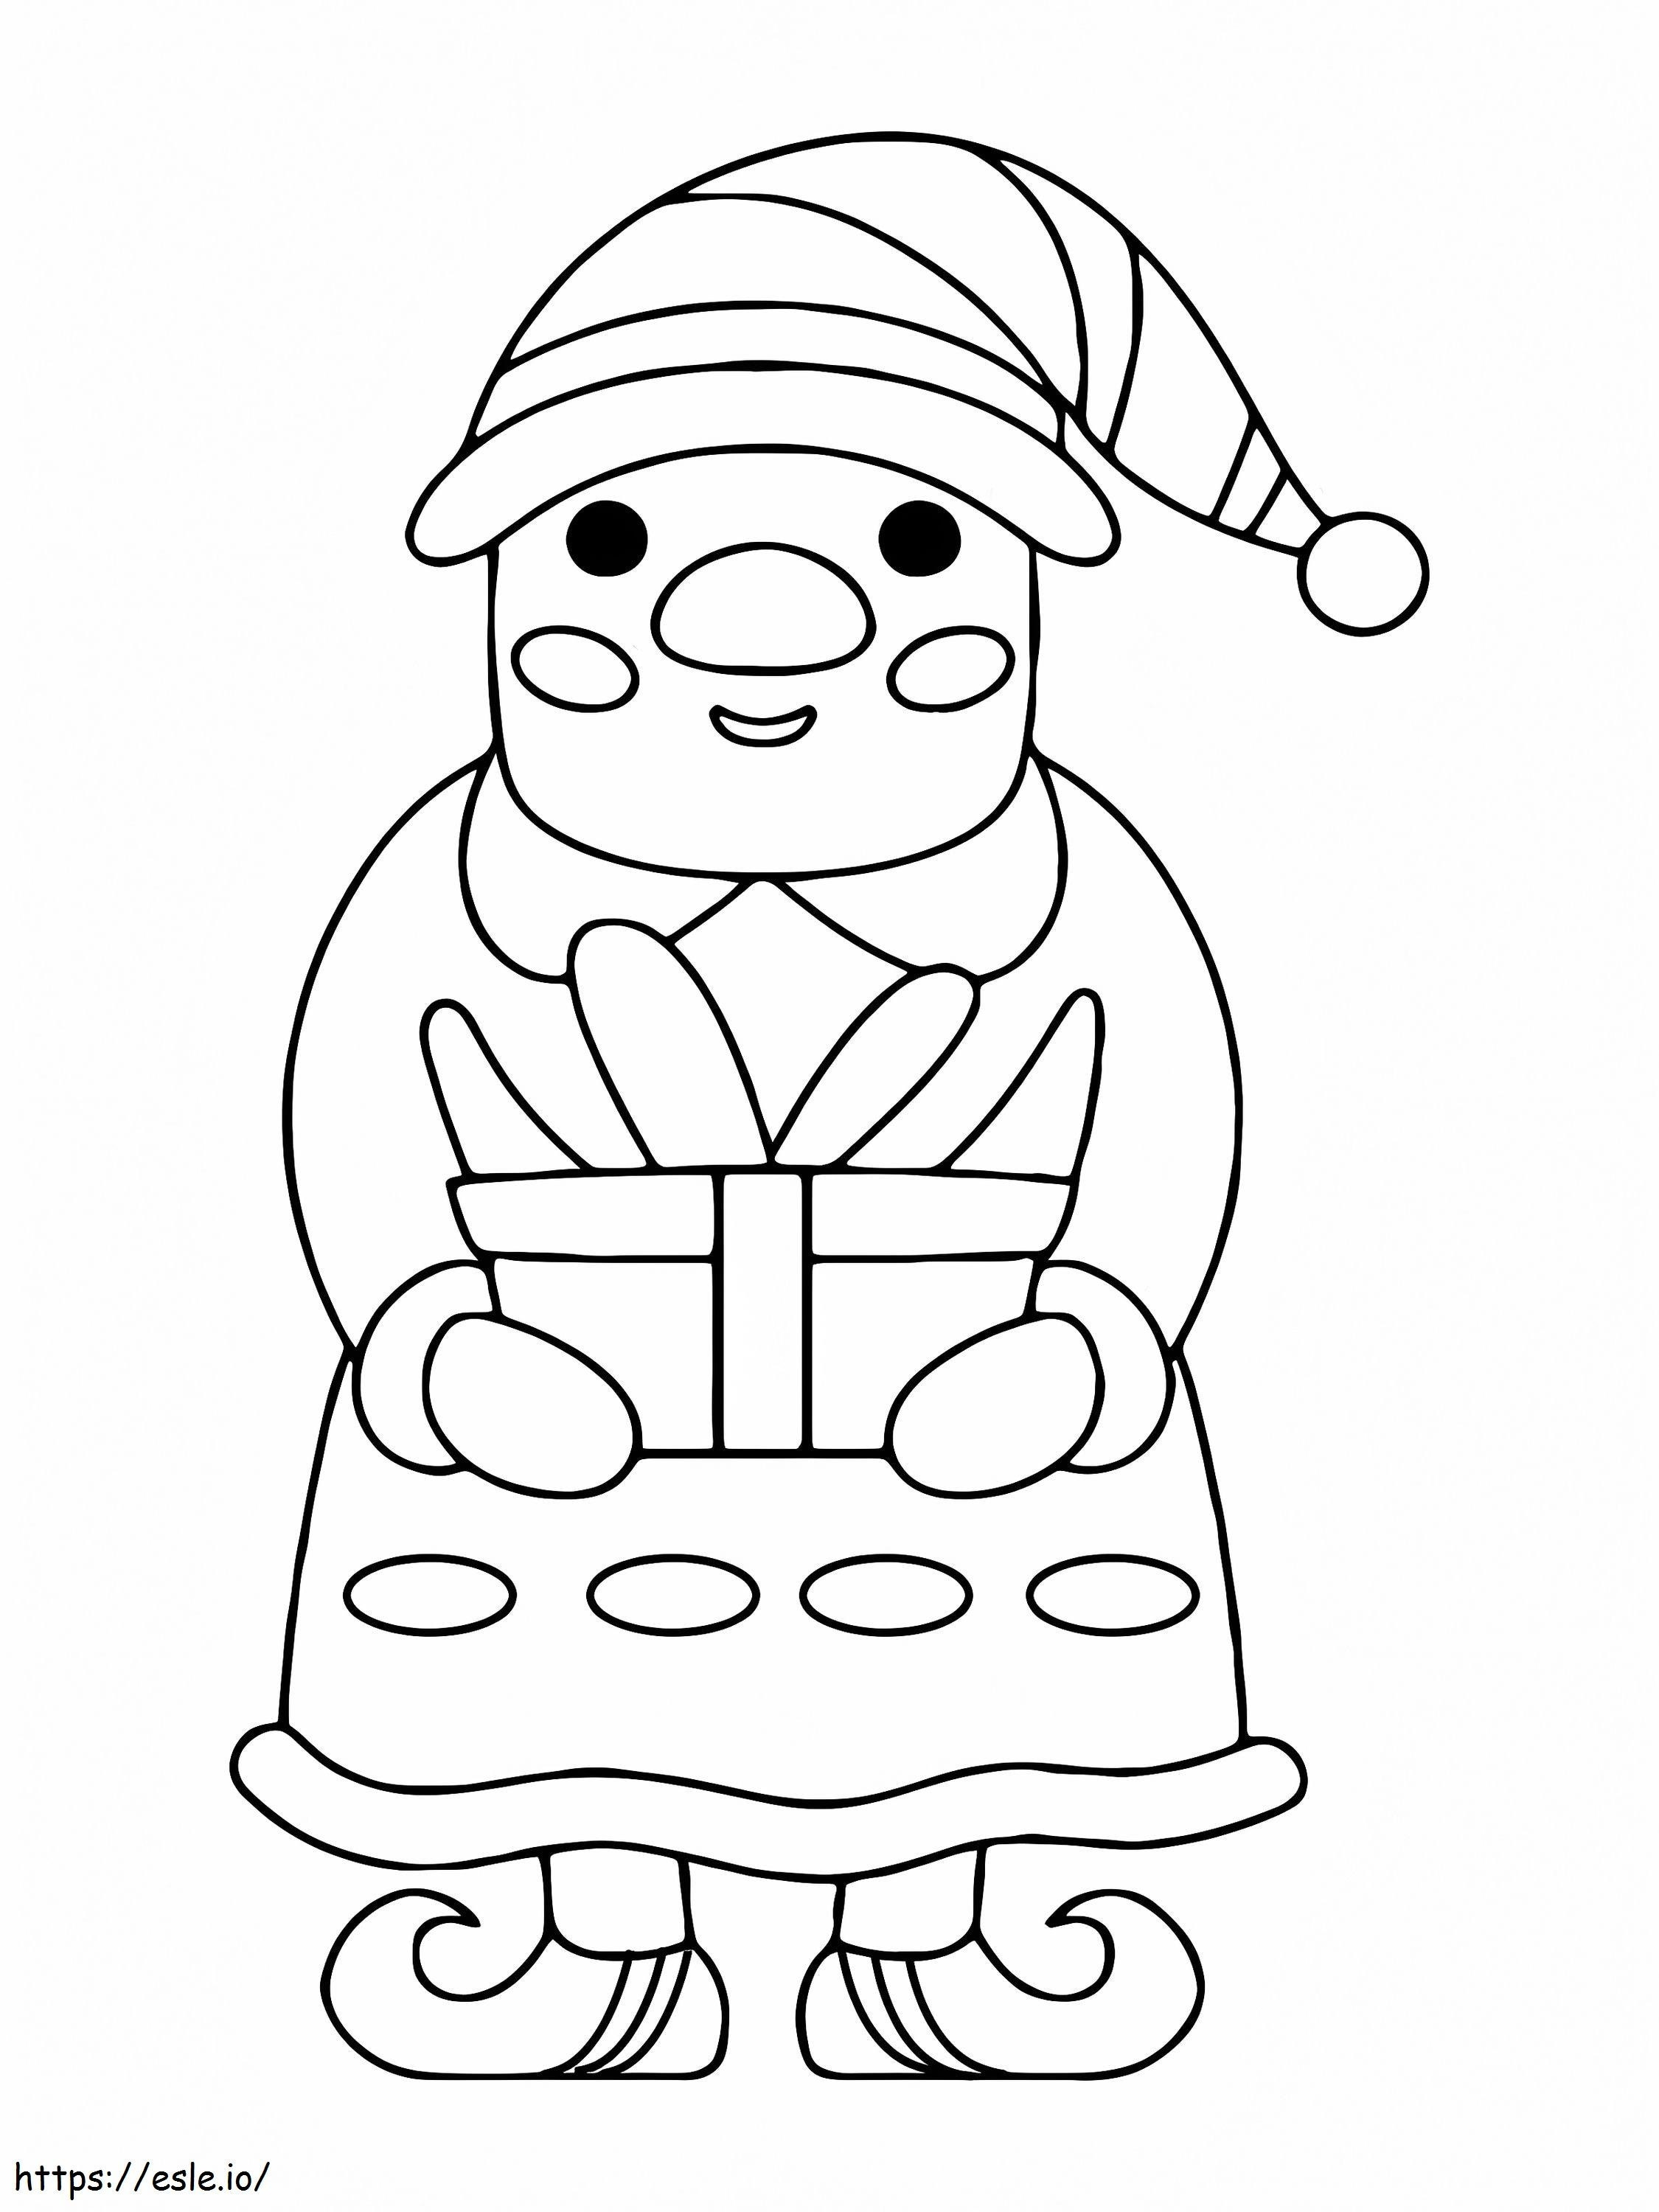 Smiling Christmas Elf coloring page